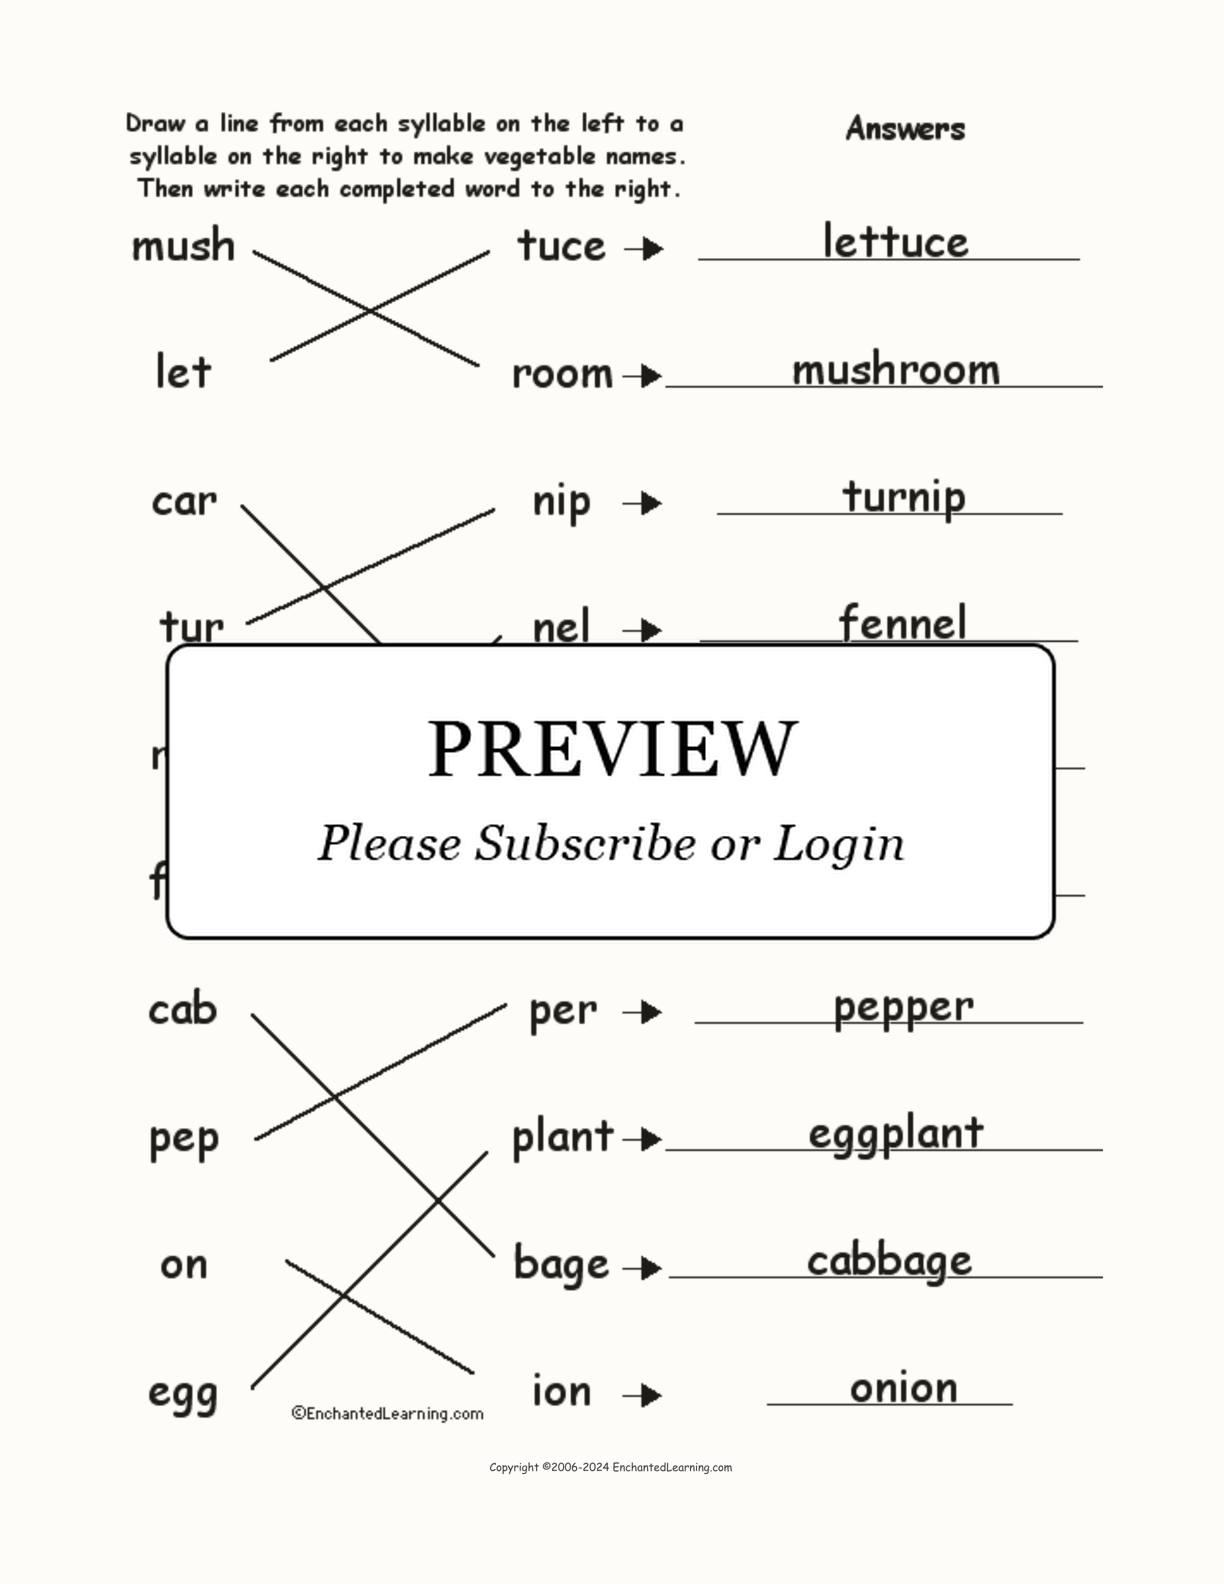 Match the Syllables: Vegetable Words interactive worksheet page 2